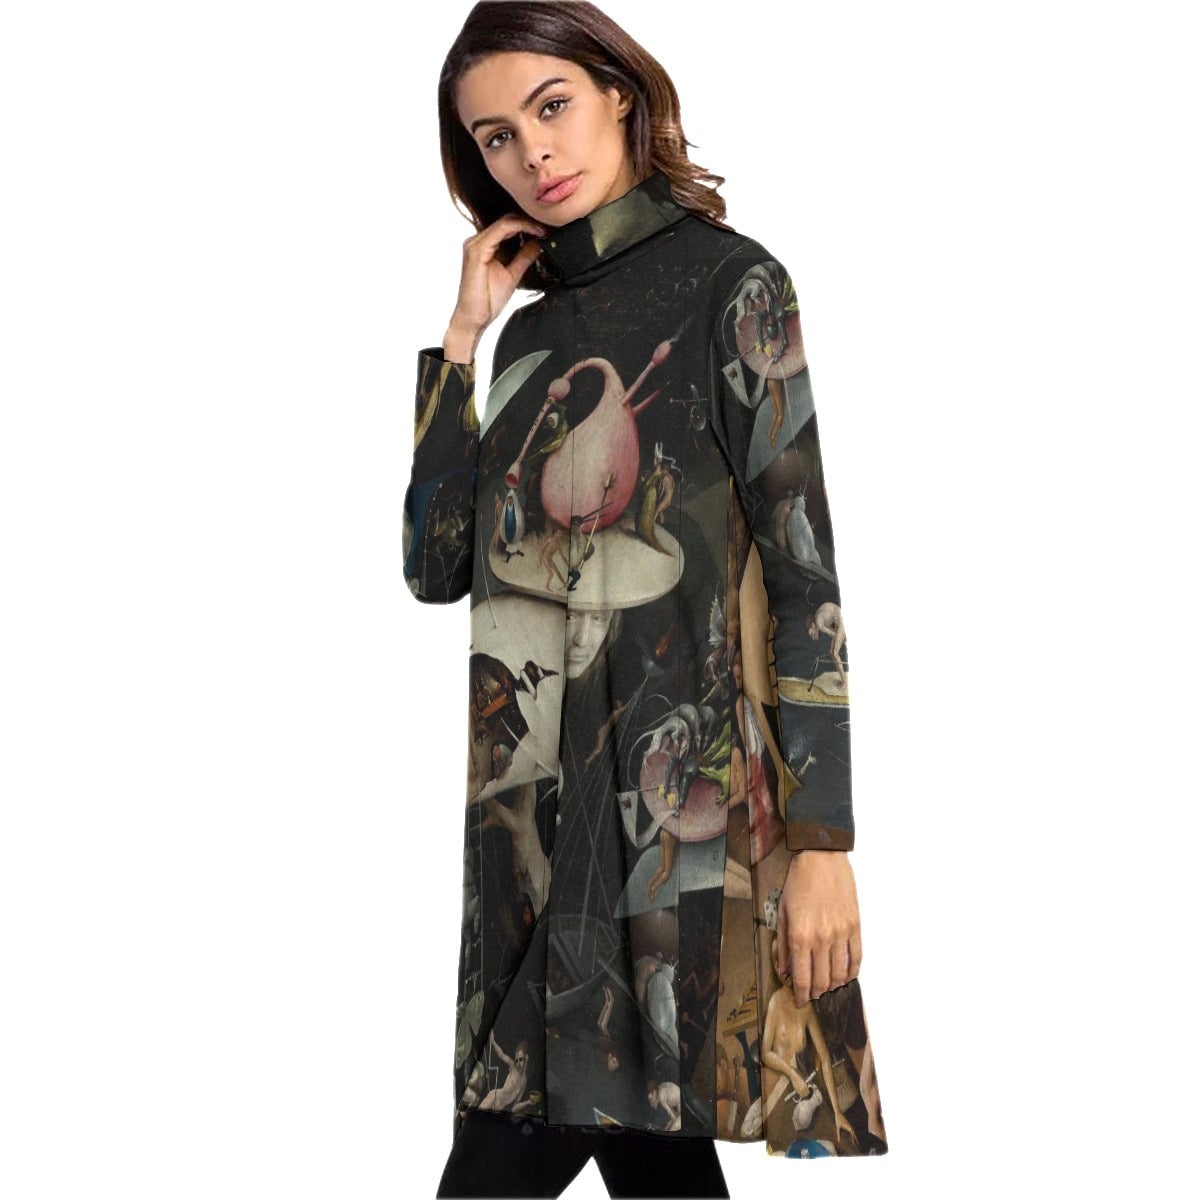 The Garden of Earthly Delights Hieronymus Bosch Dress Long Sleeve